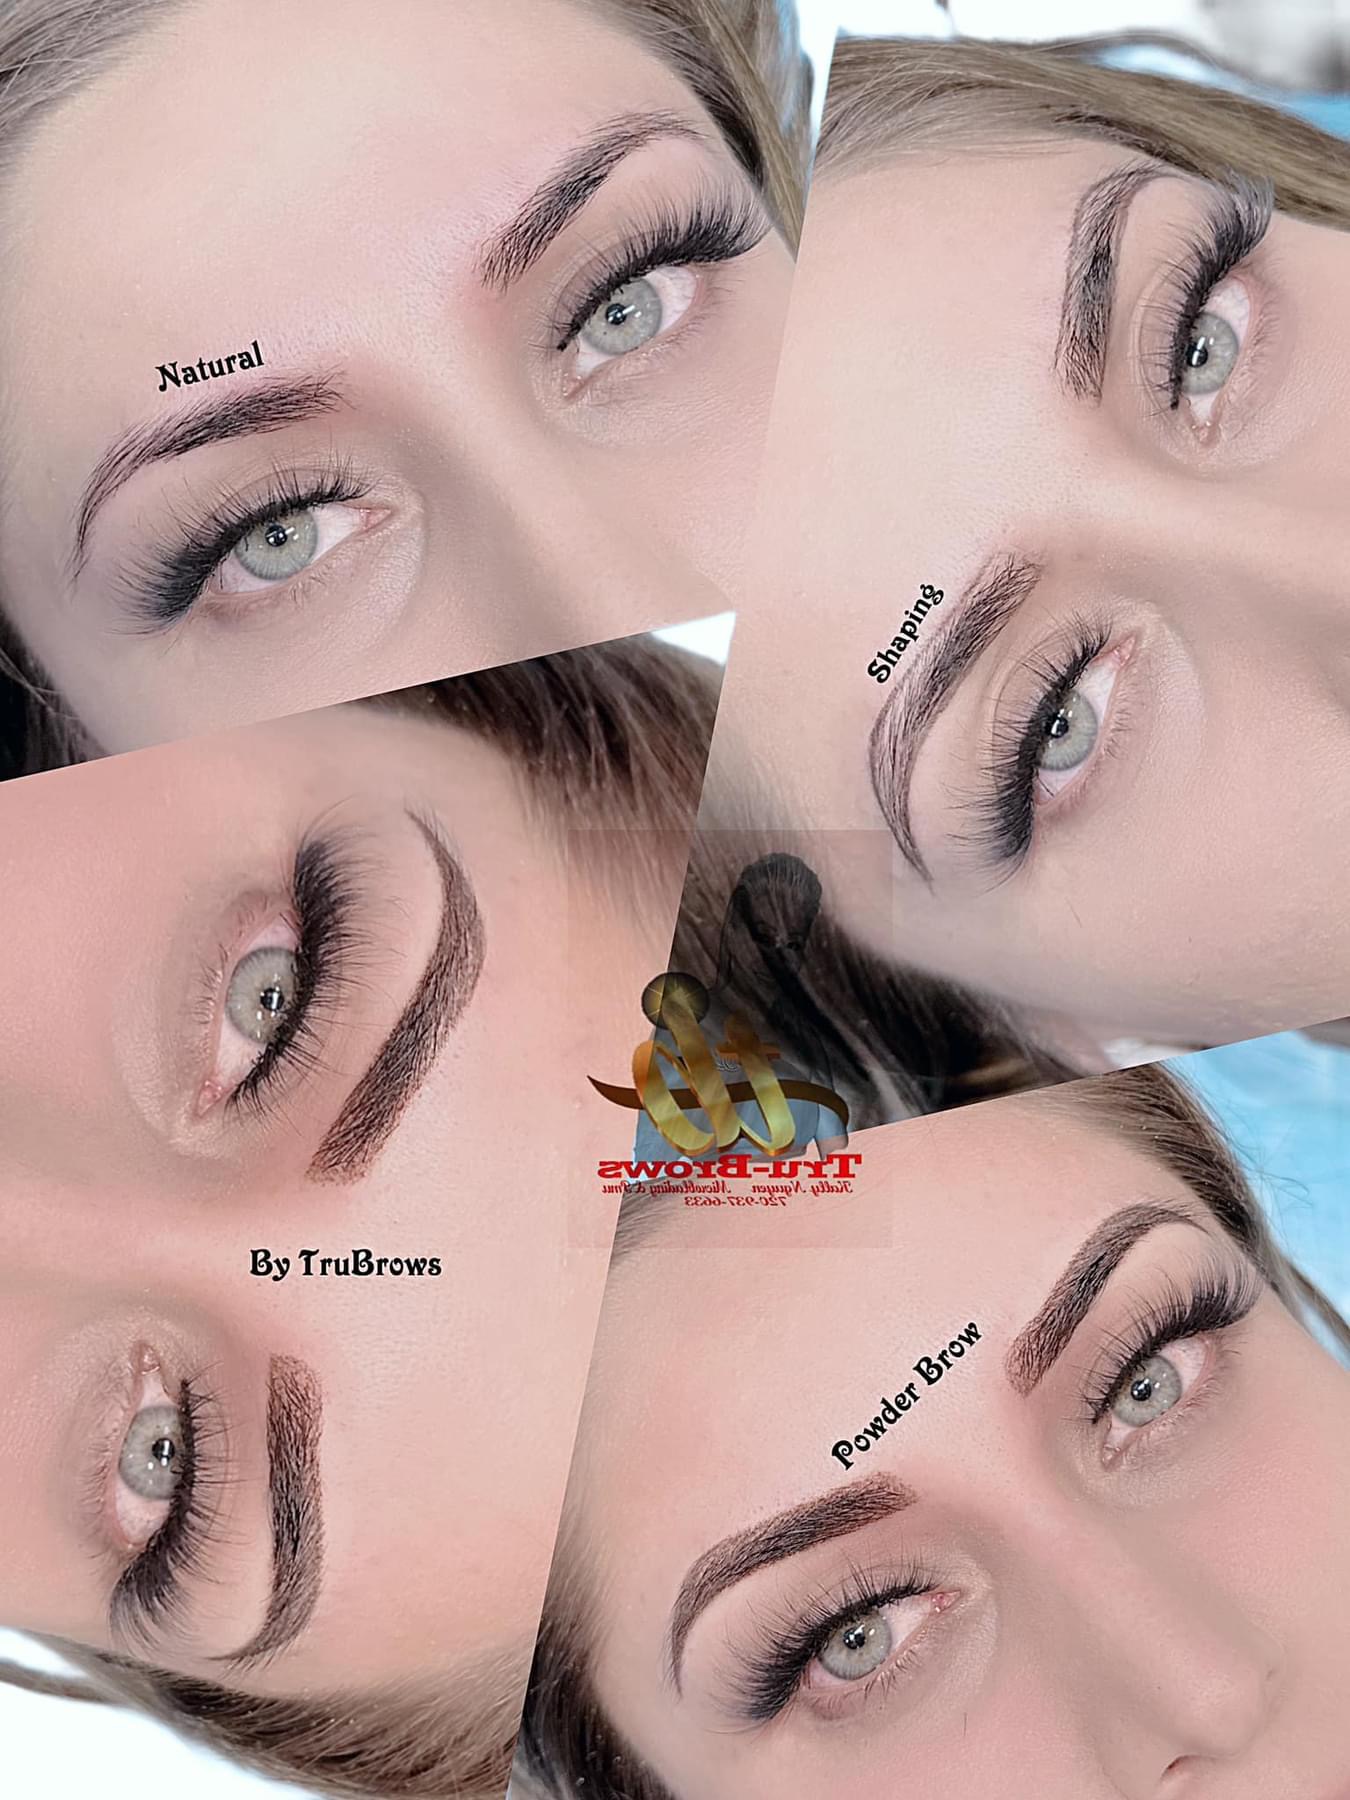 TruBrows